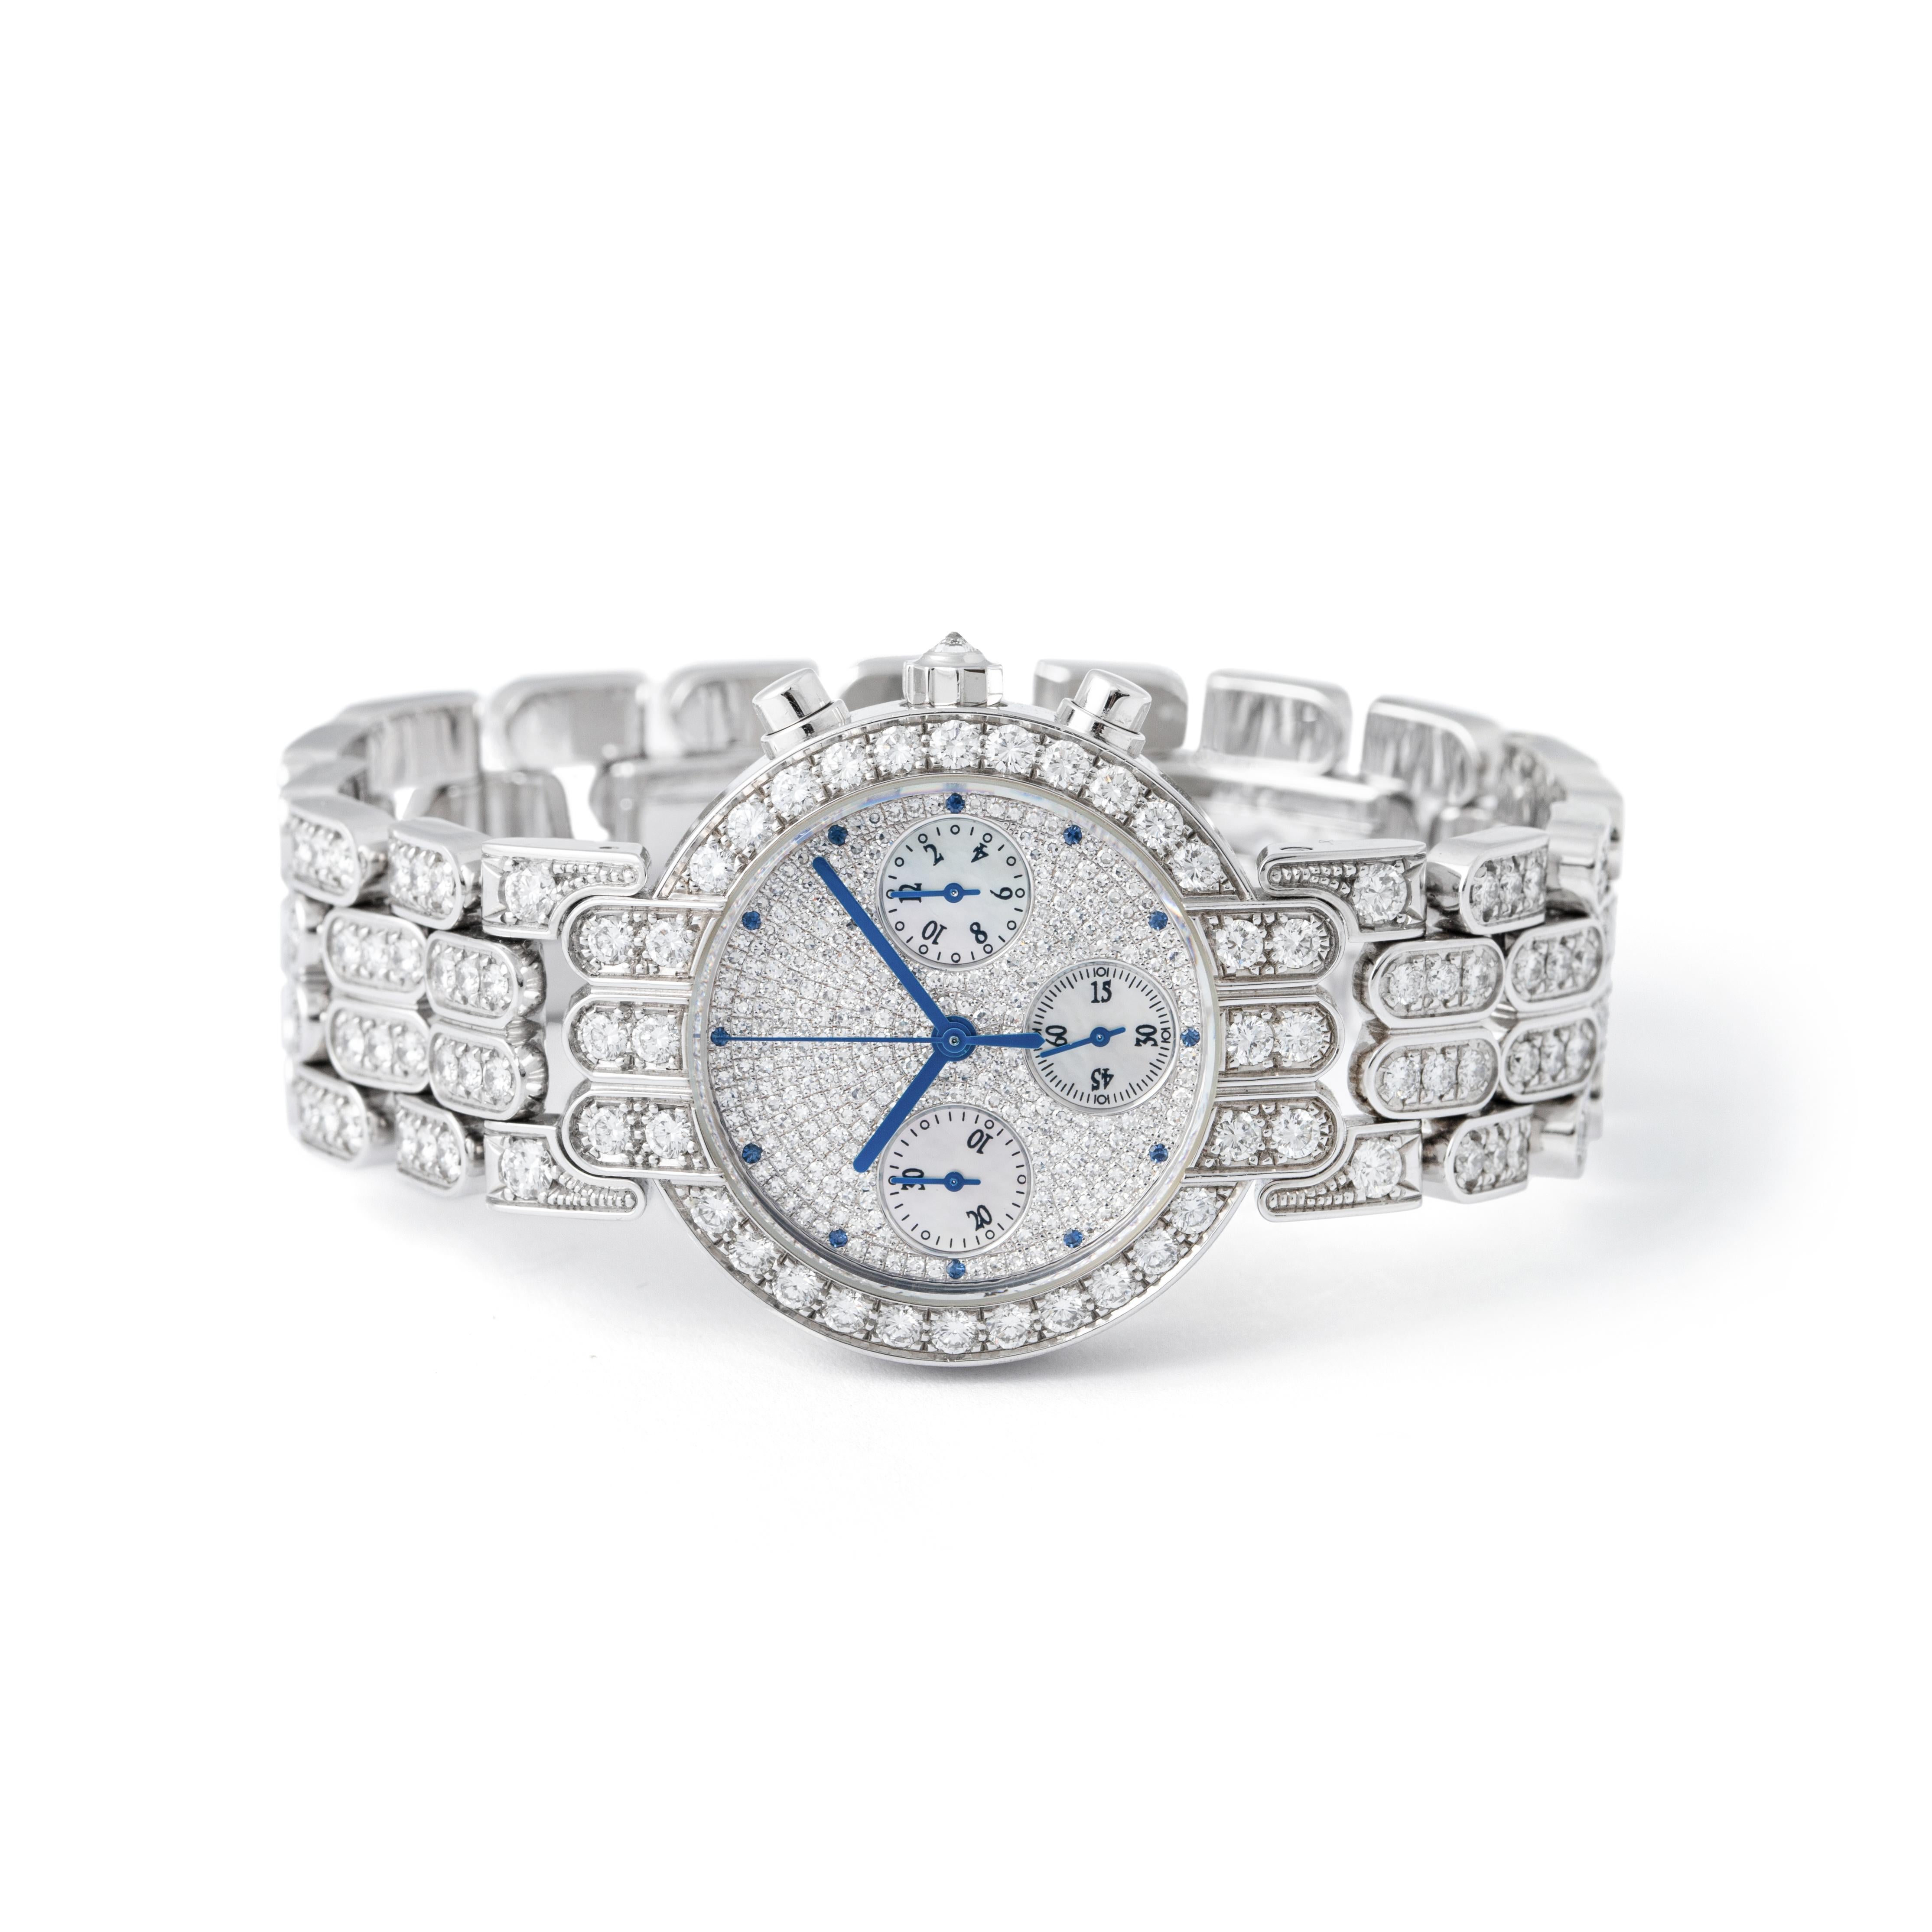 Solid 18kt white gold case & bracelet with a polished finish.
The case, bezel, lugs & bracelet are pave set with diamonds.
The crown is set with a single rose cut diamond.
Total diamond weight - approximately 9.45 carats.
Dial:
Pave set with